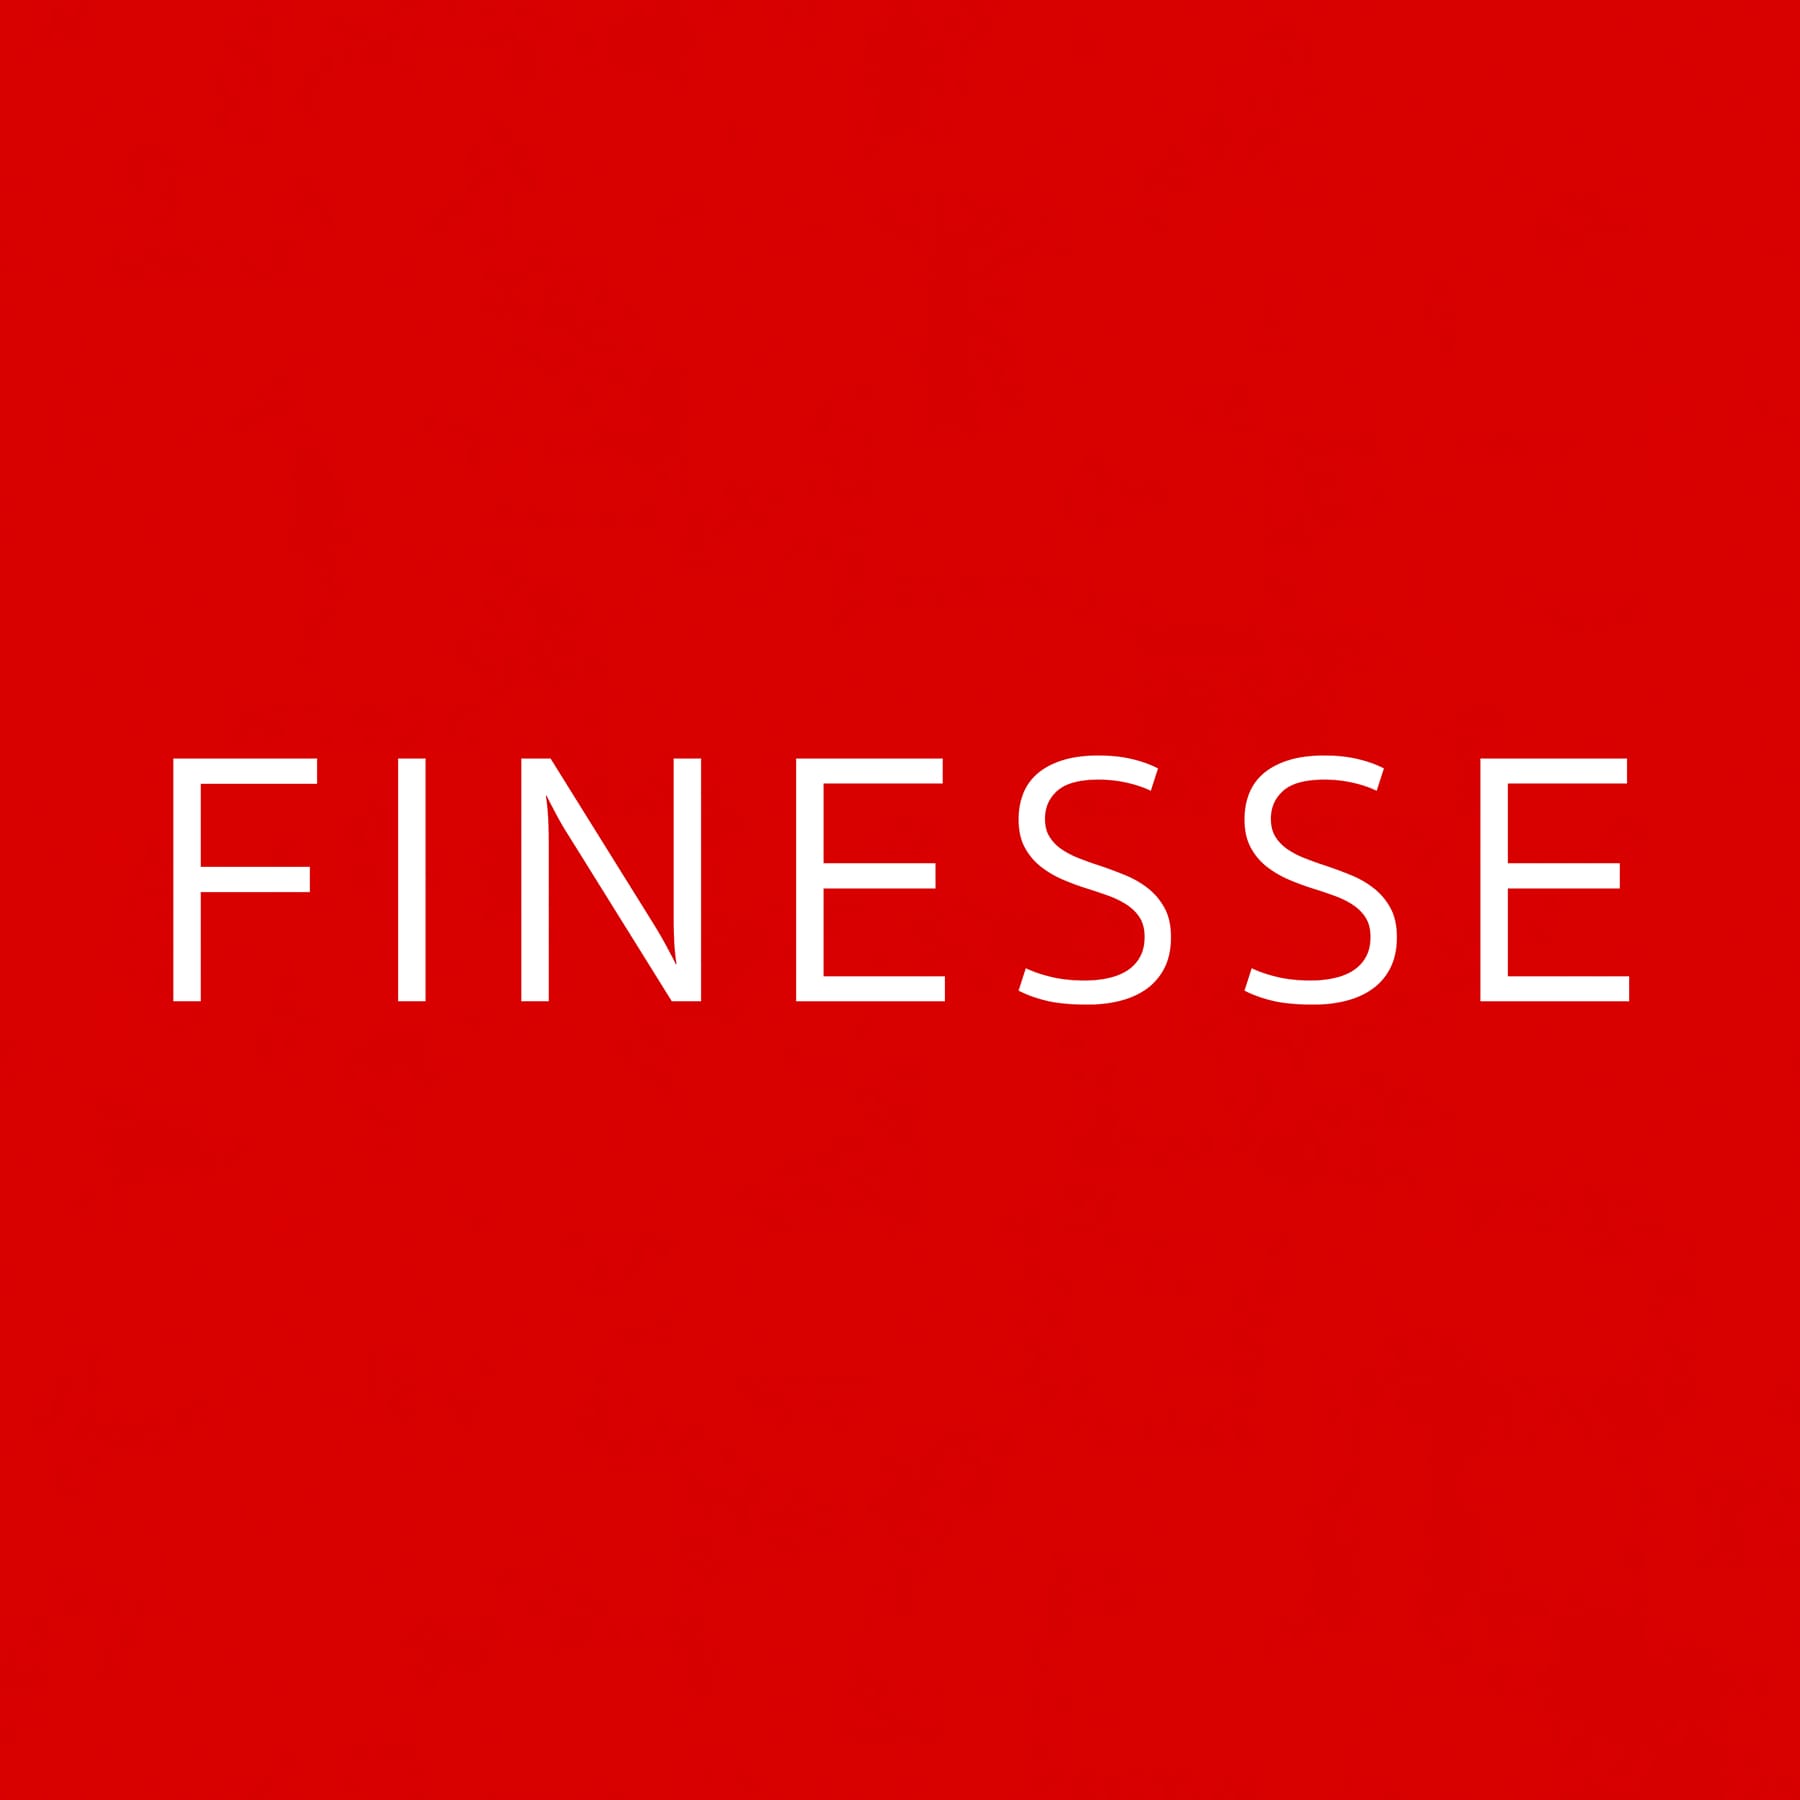 Finesse Logo - A' Design Award and Competition - Finesse Website Press Kit